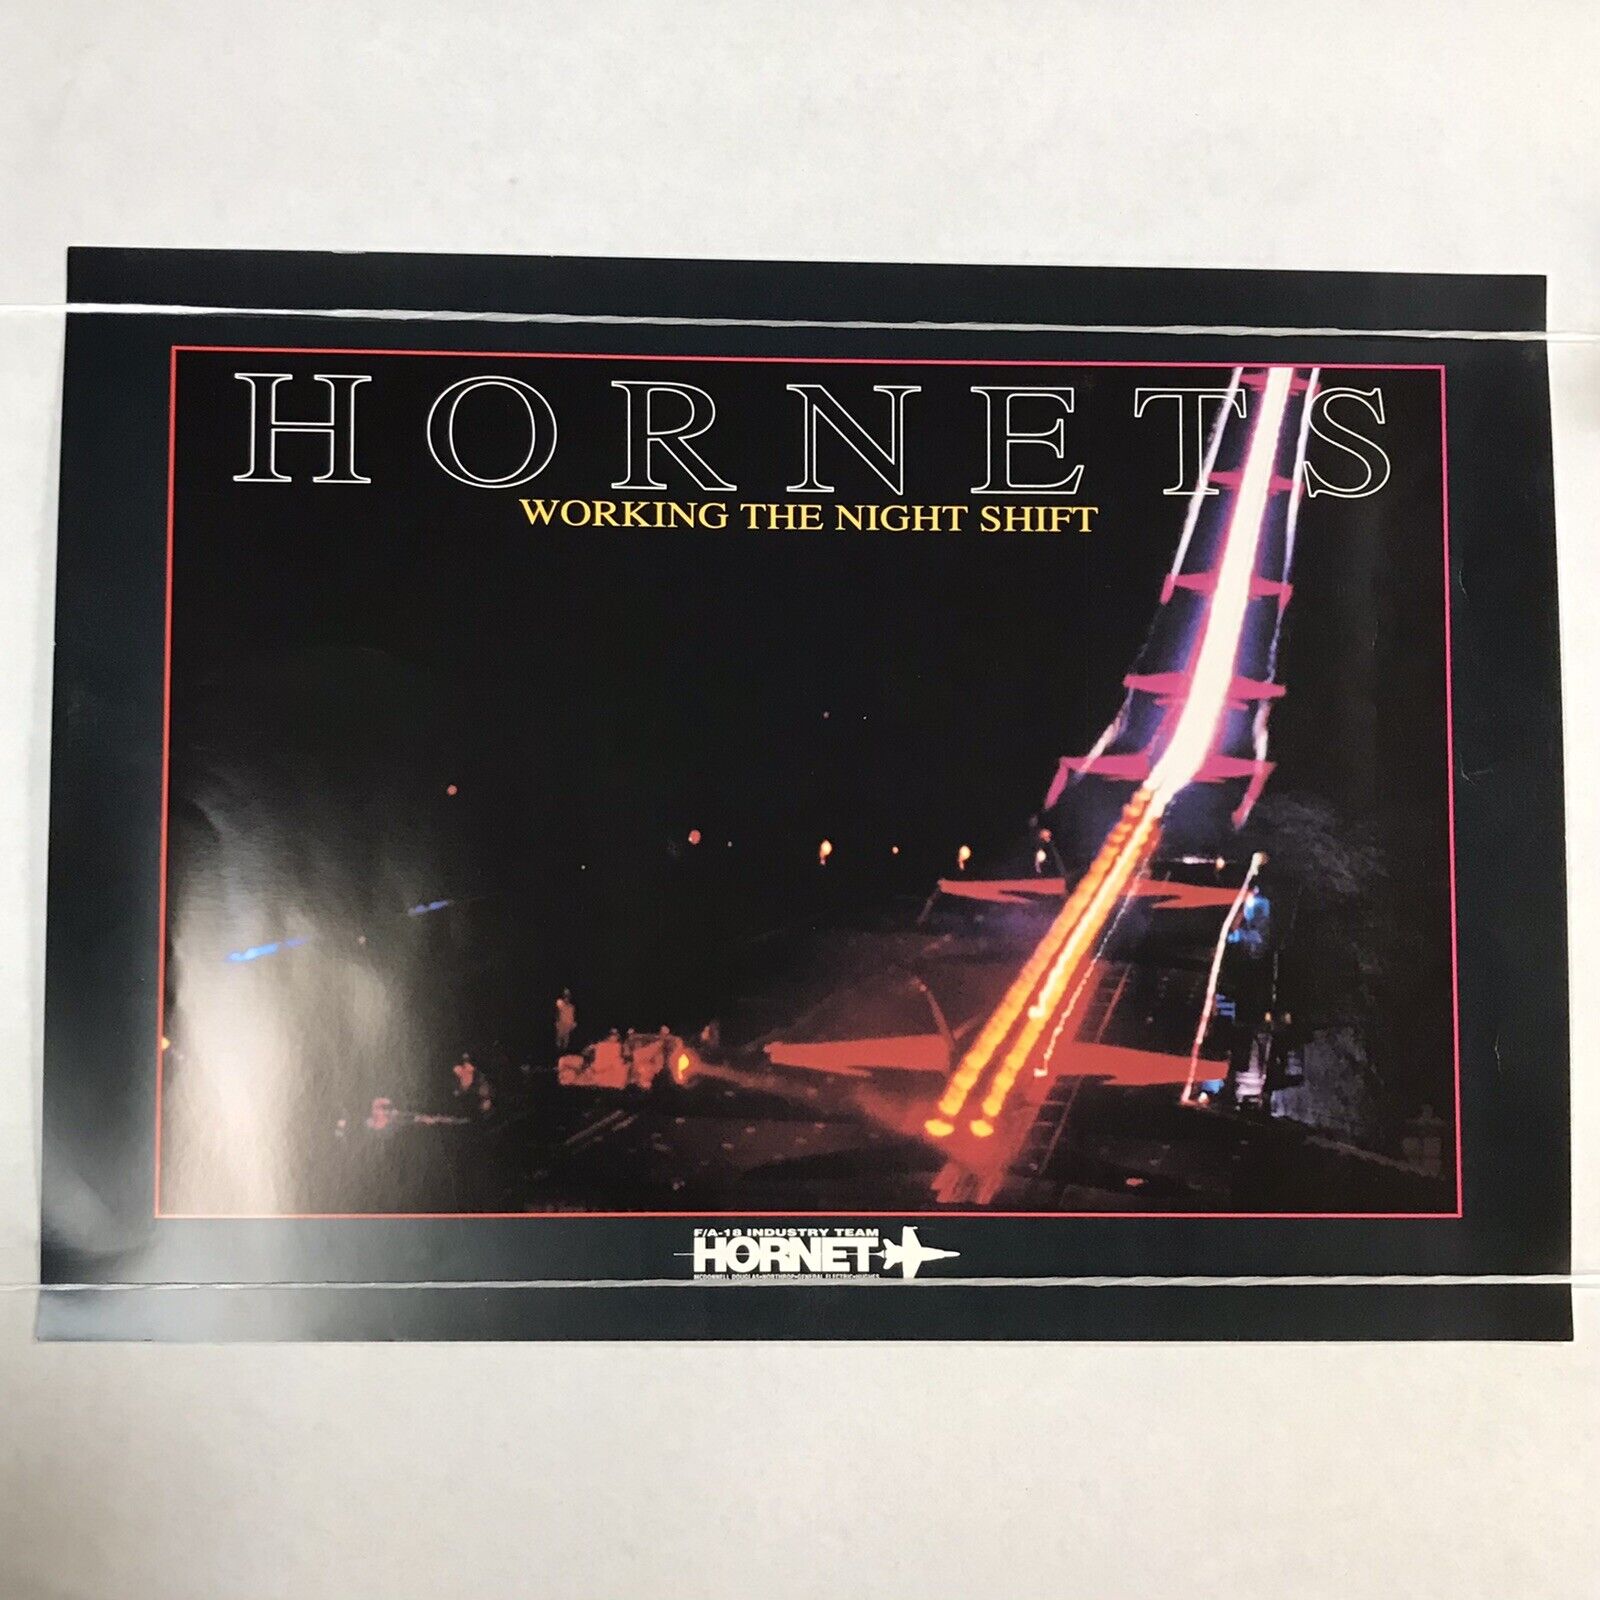 Vintage FA-18 Hornet Working the Night Shift Poster 25 x 18 Takeoff Time-Lapse